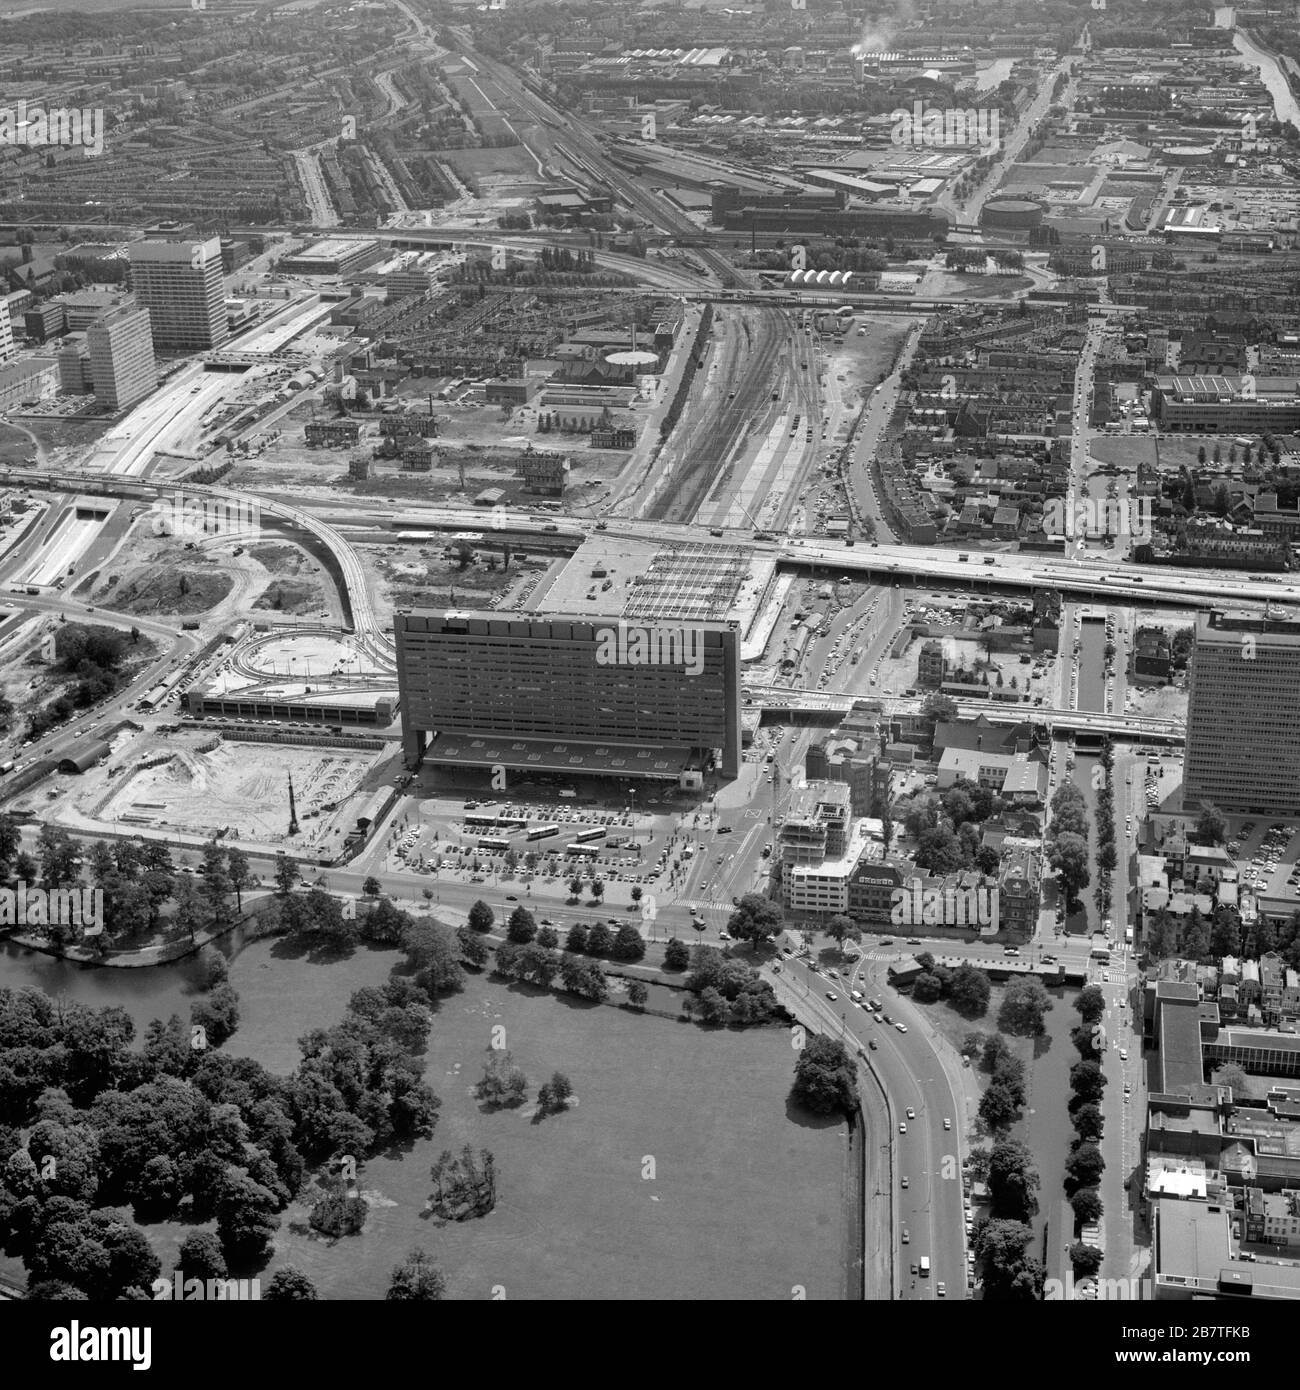 The Hague, Holland, June 20 - 1975: Historical black and white aerial photo of the new built Central Railway Station in The Hague, Holland Stock Photo